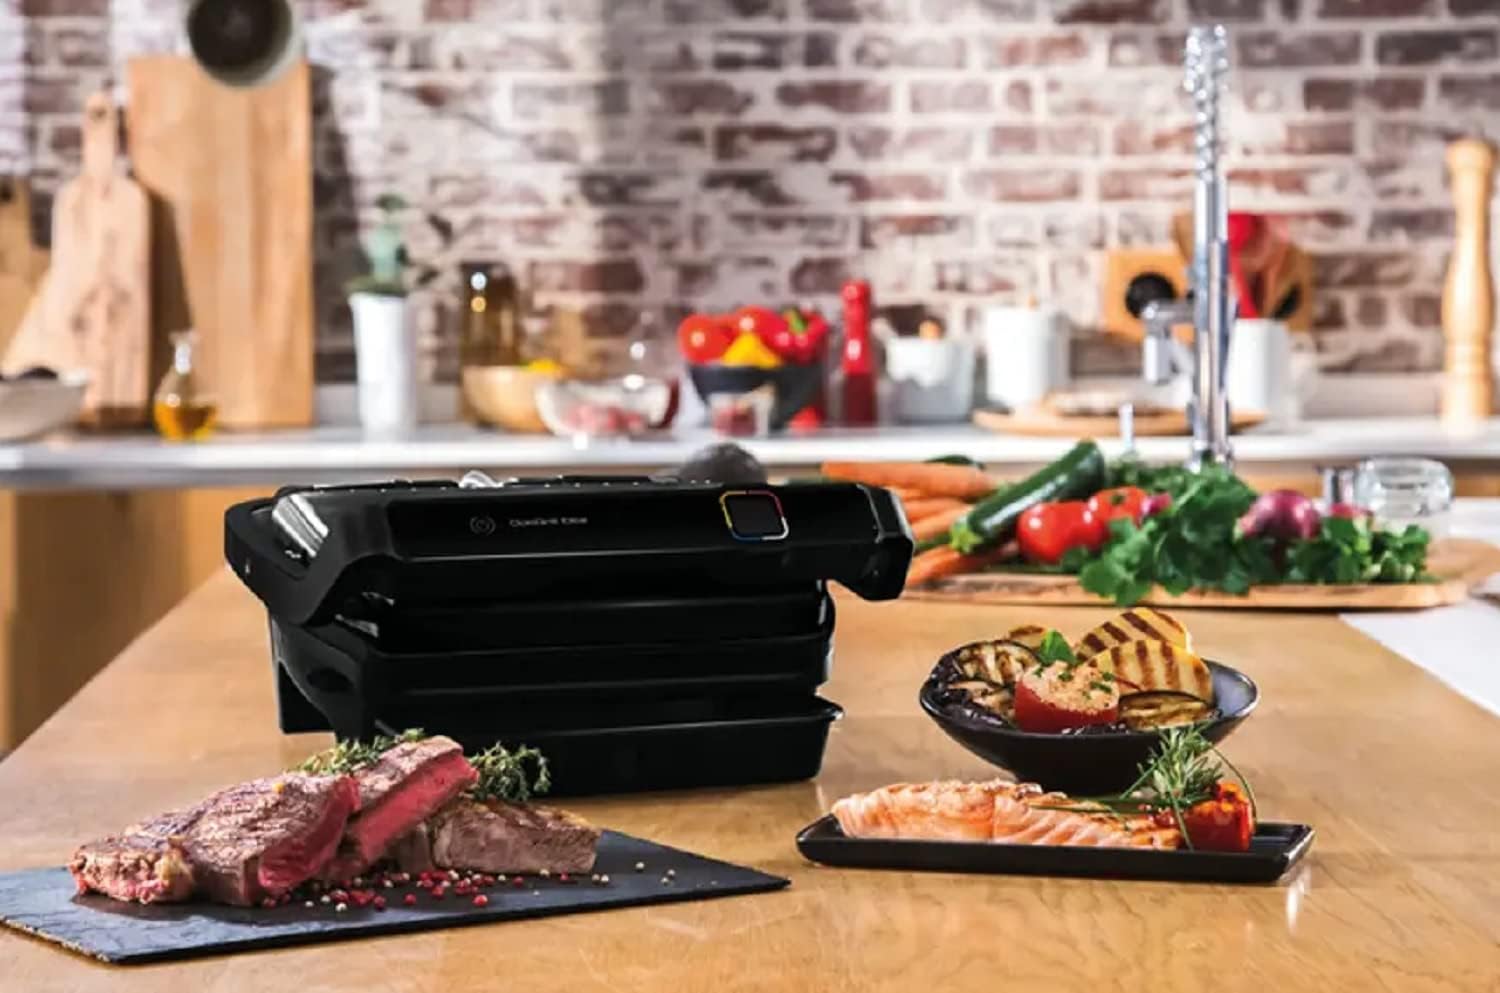 Tefal Optigrill Elite Contact Grill I 2000 Watt I with Hamburger Press + Grill Book I Indoor & Outdoor Grill I 12 Automatic Programs I Touch Display I Stainless Steel I Perfect Grill Results